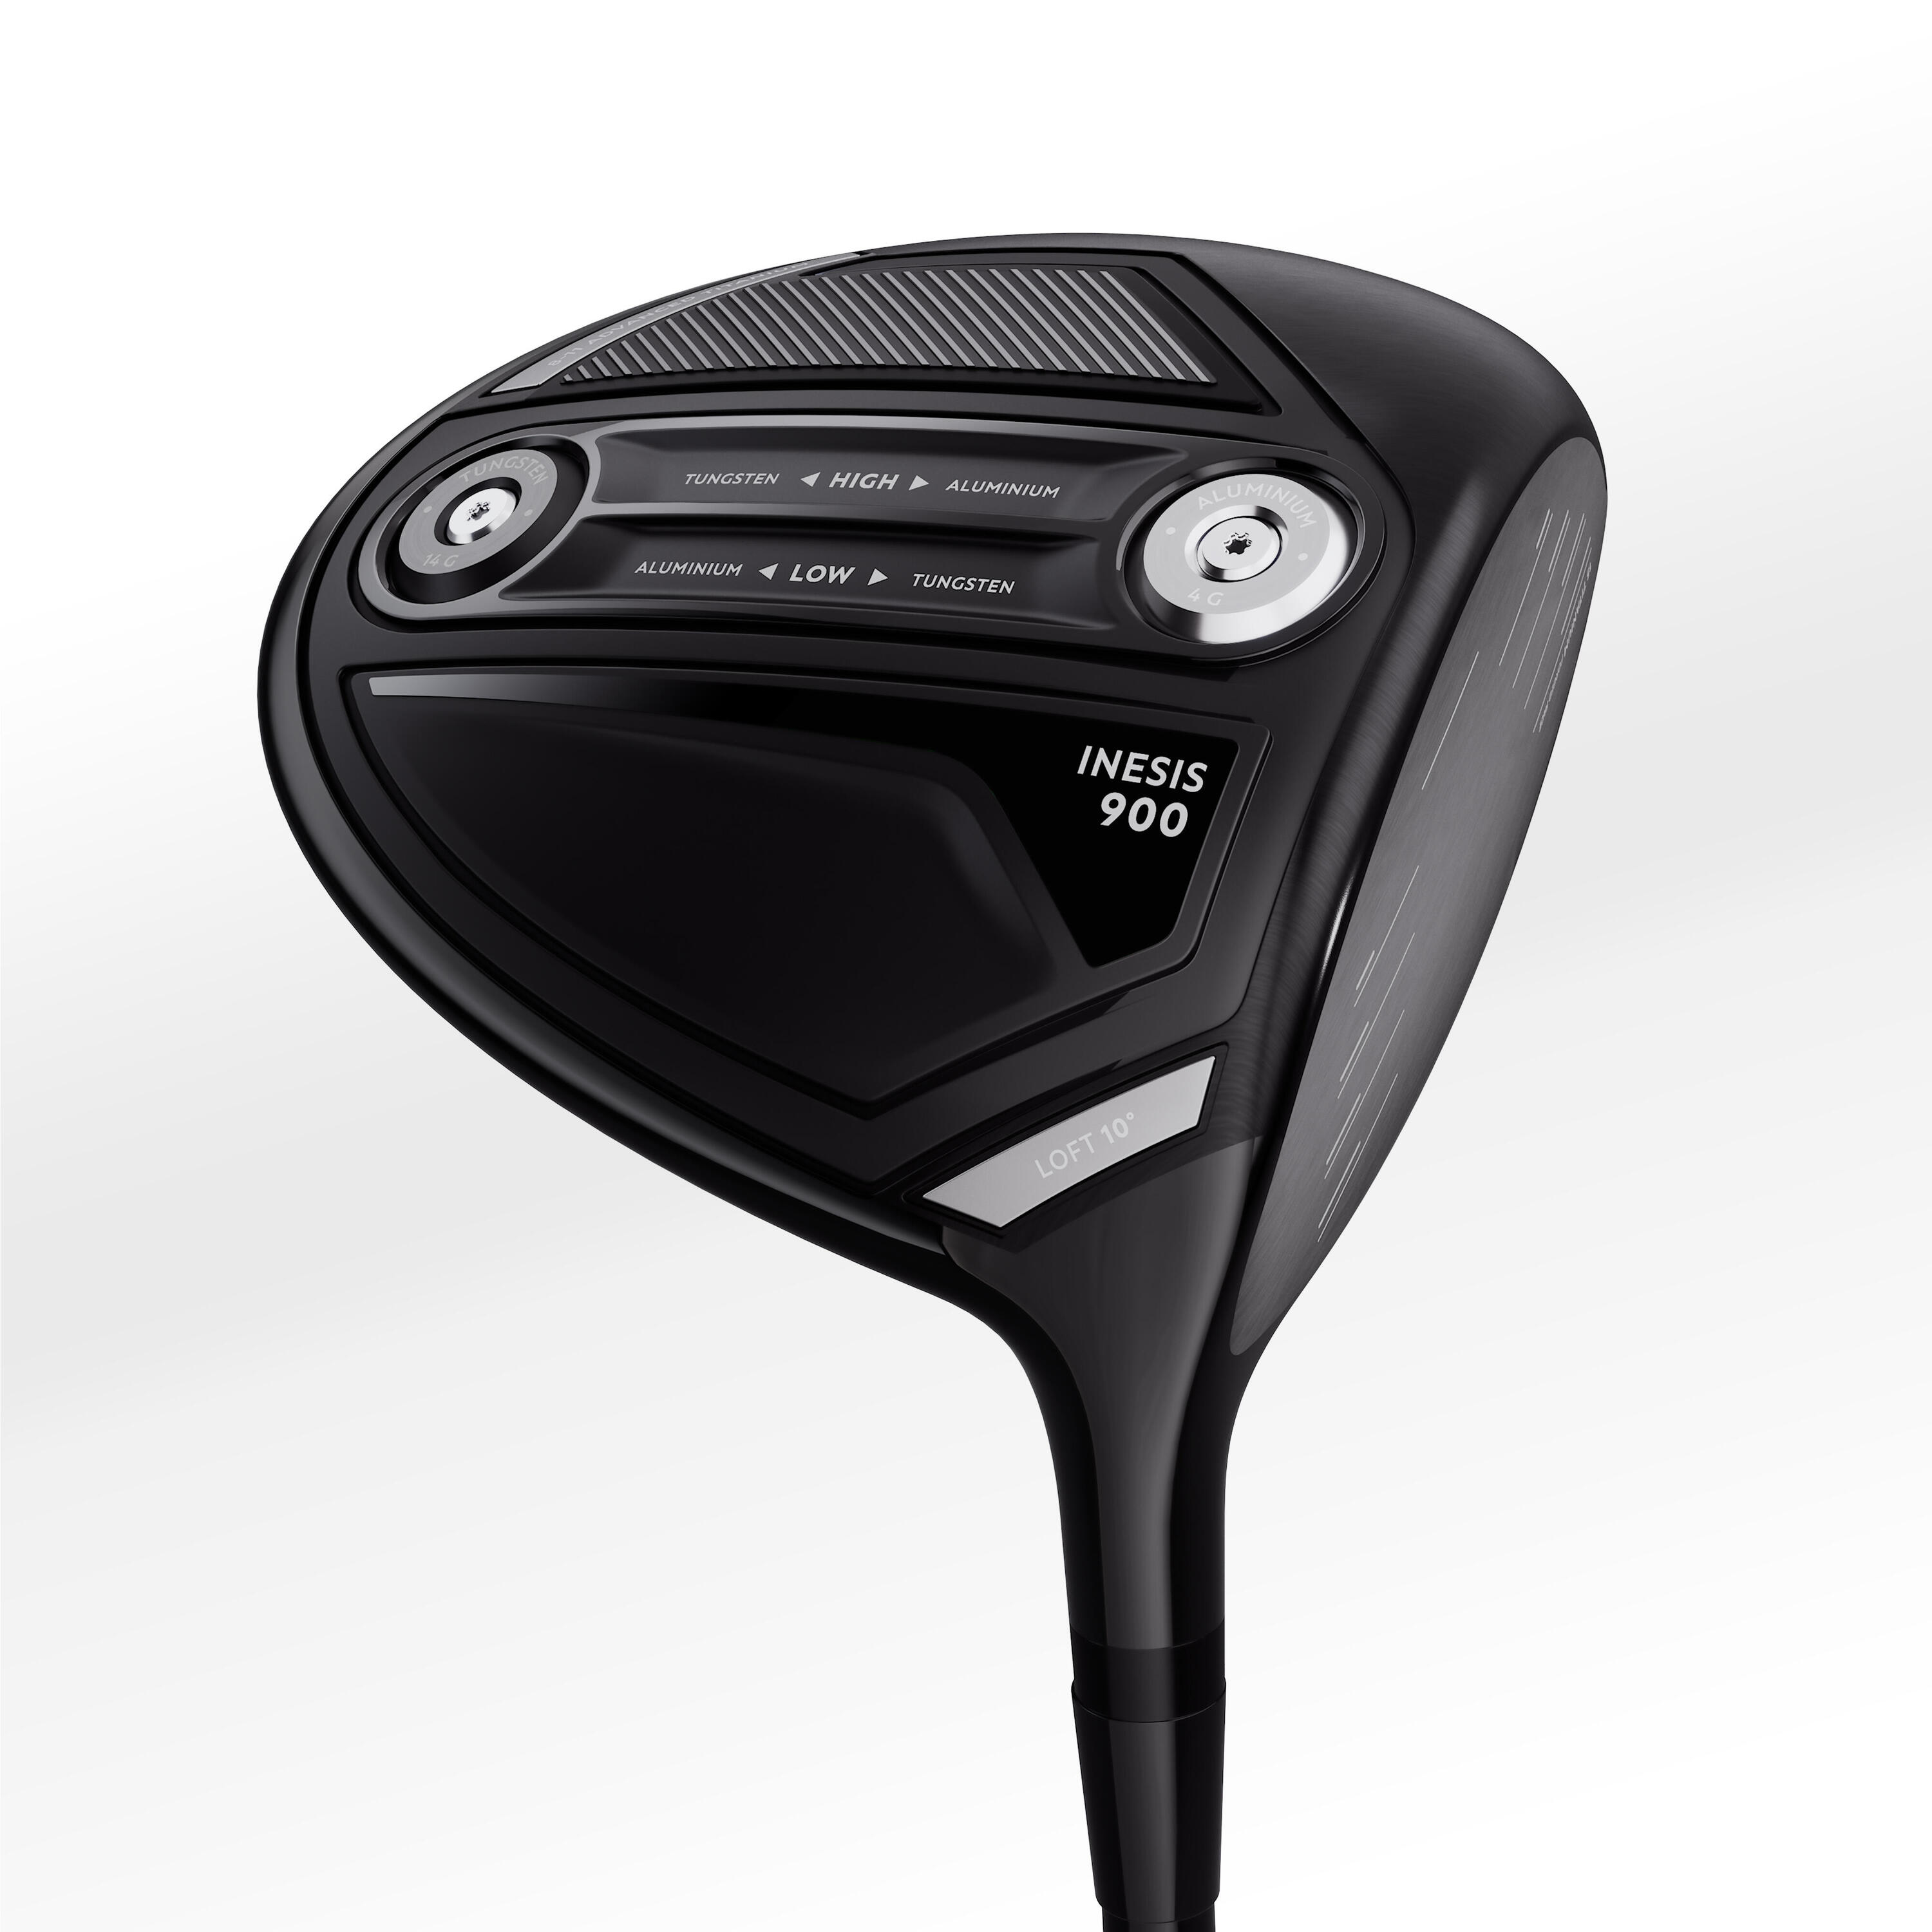 INESIS Golf driver right handed low speed - INESIS 900